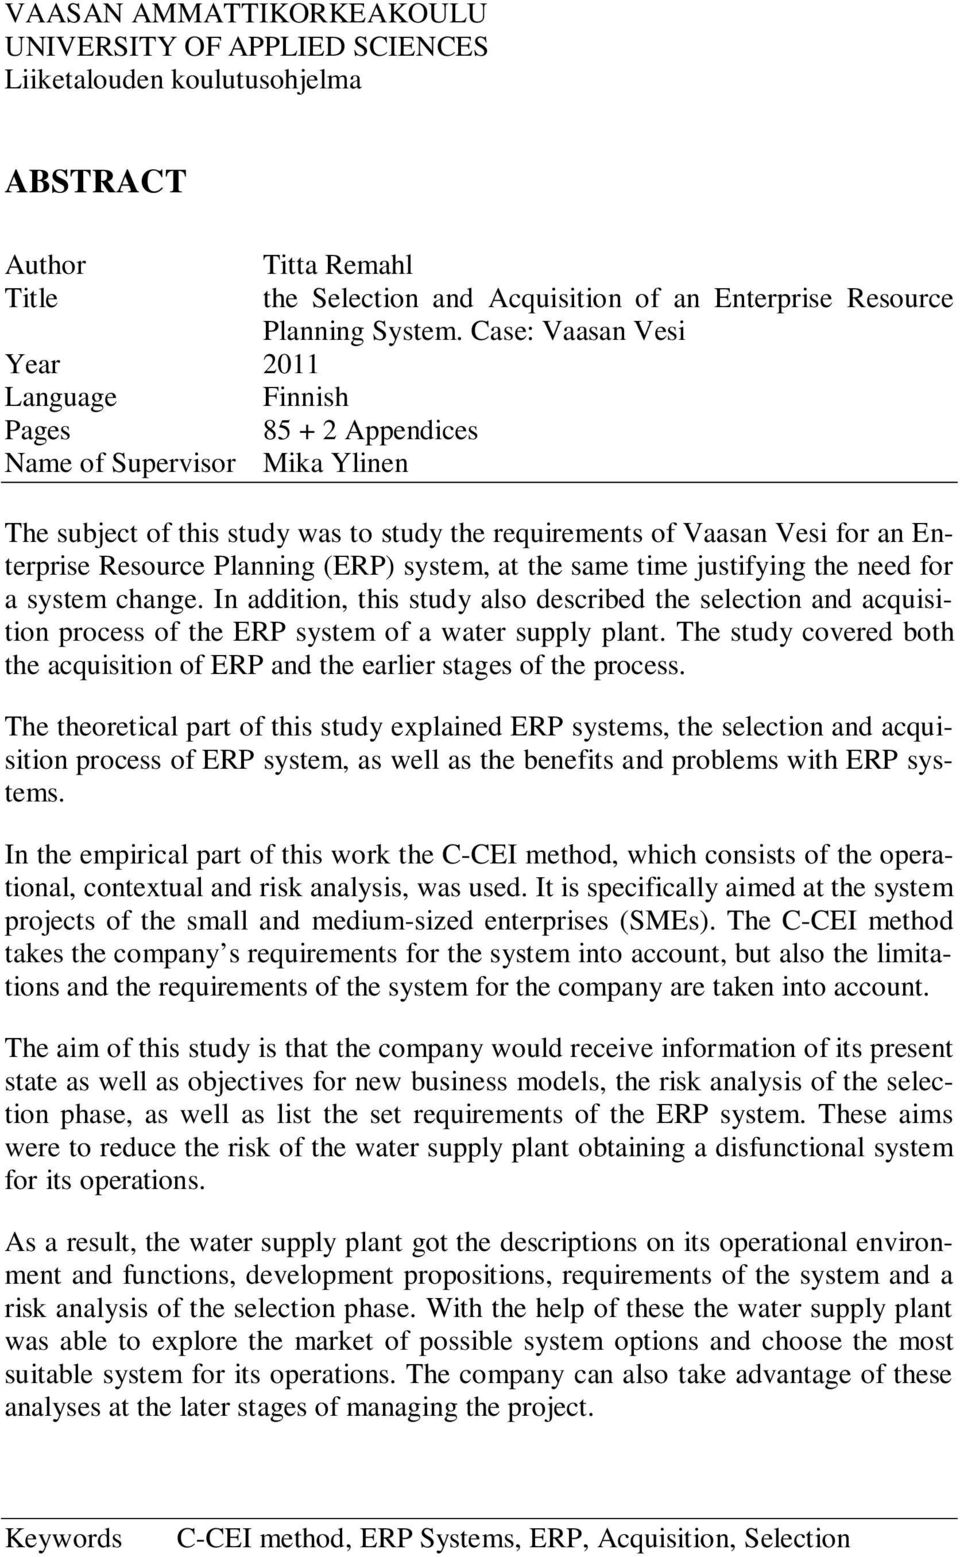 Planning (ERP) system, at the same time justifying the need for a system change. In addition, this study also described the selection and acquisition process of the ERP system of a water supply plant.